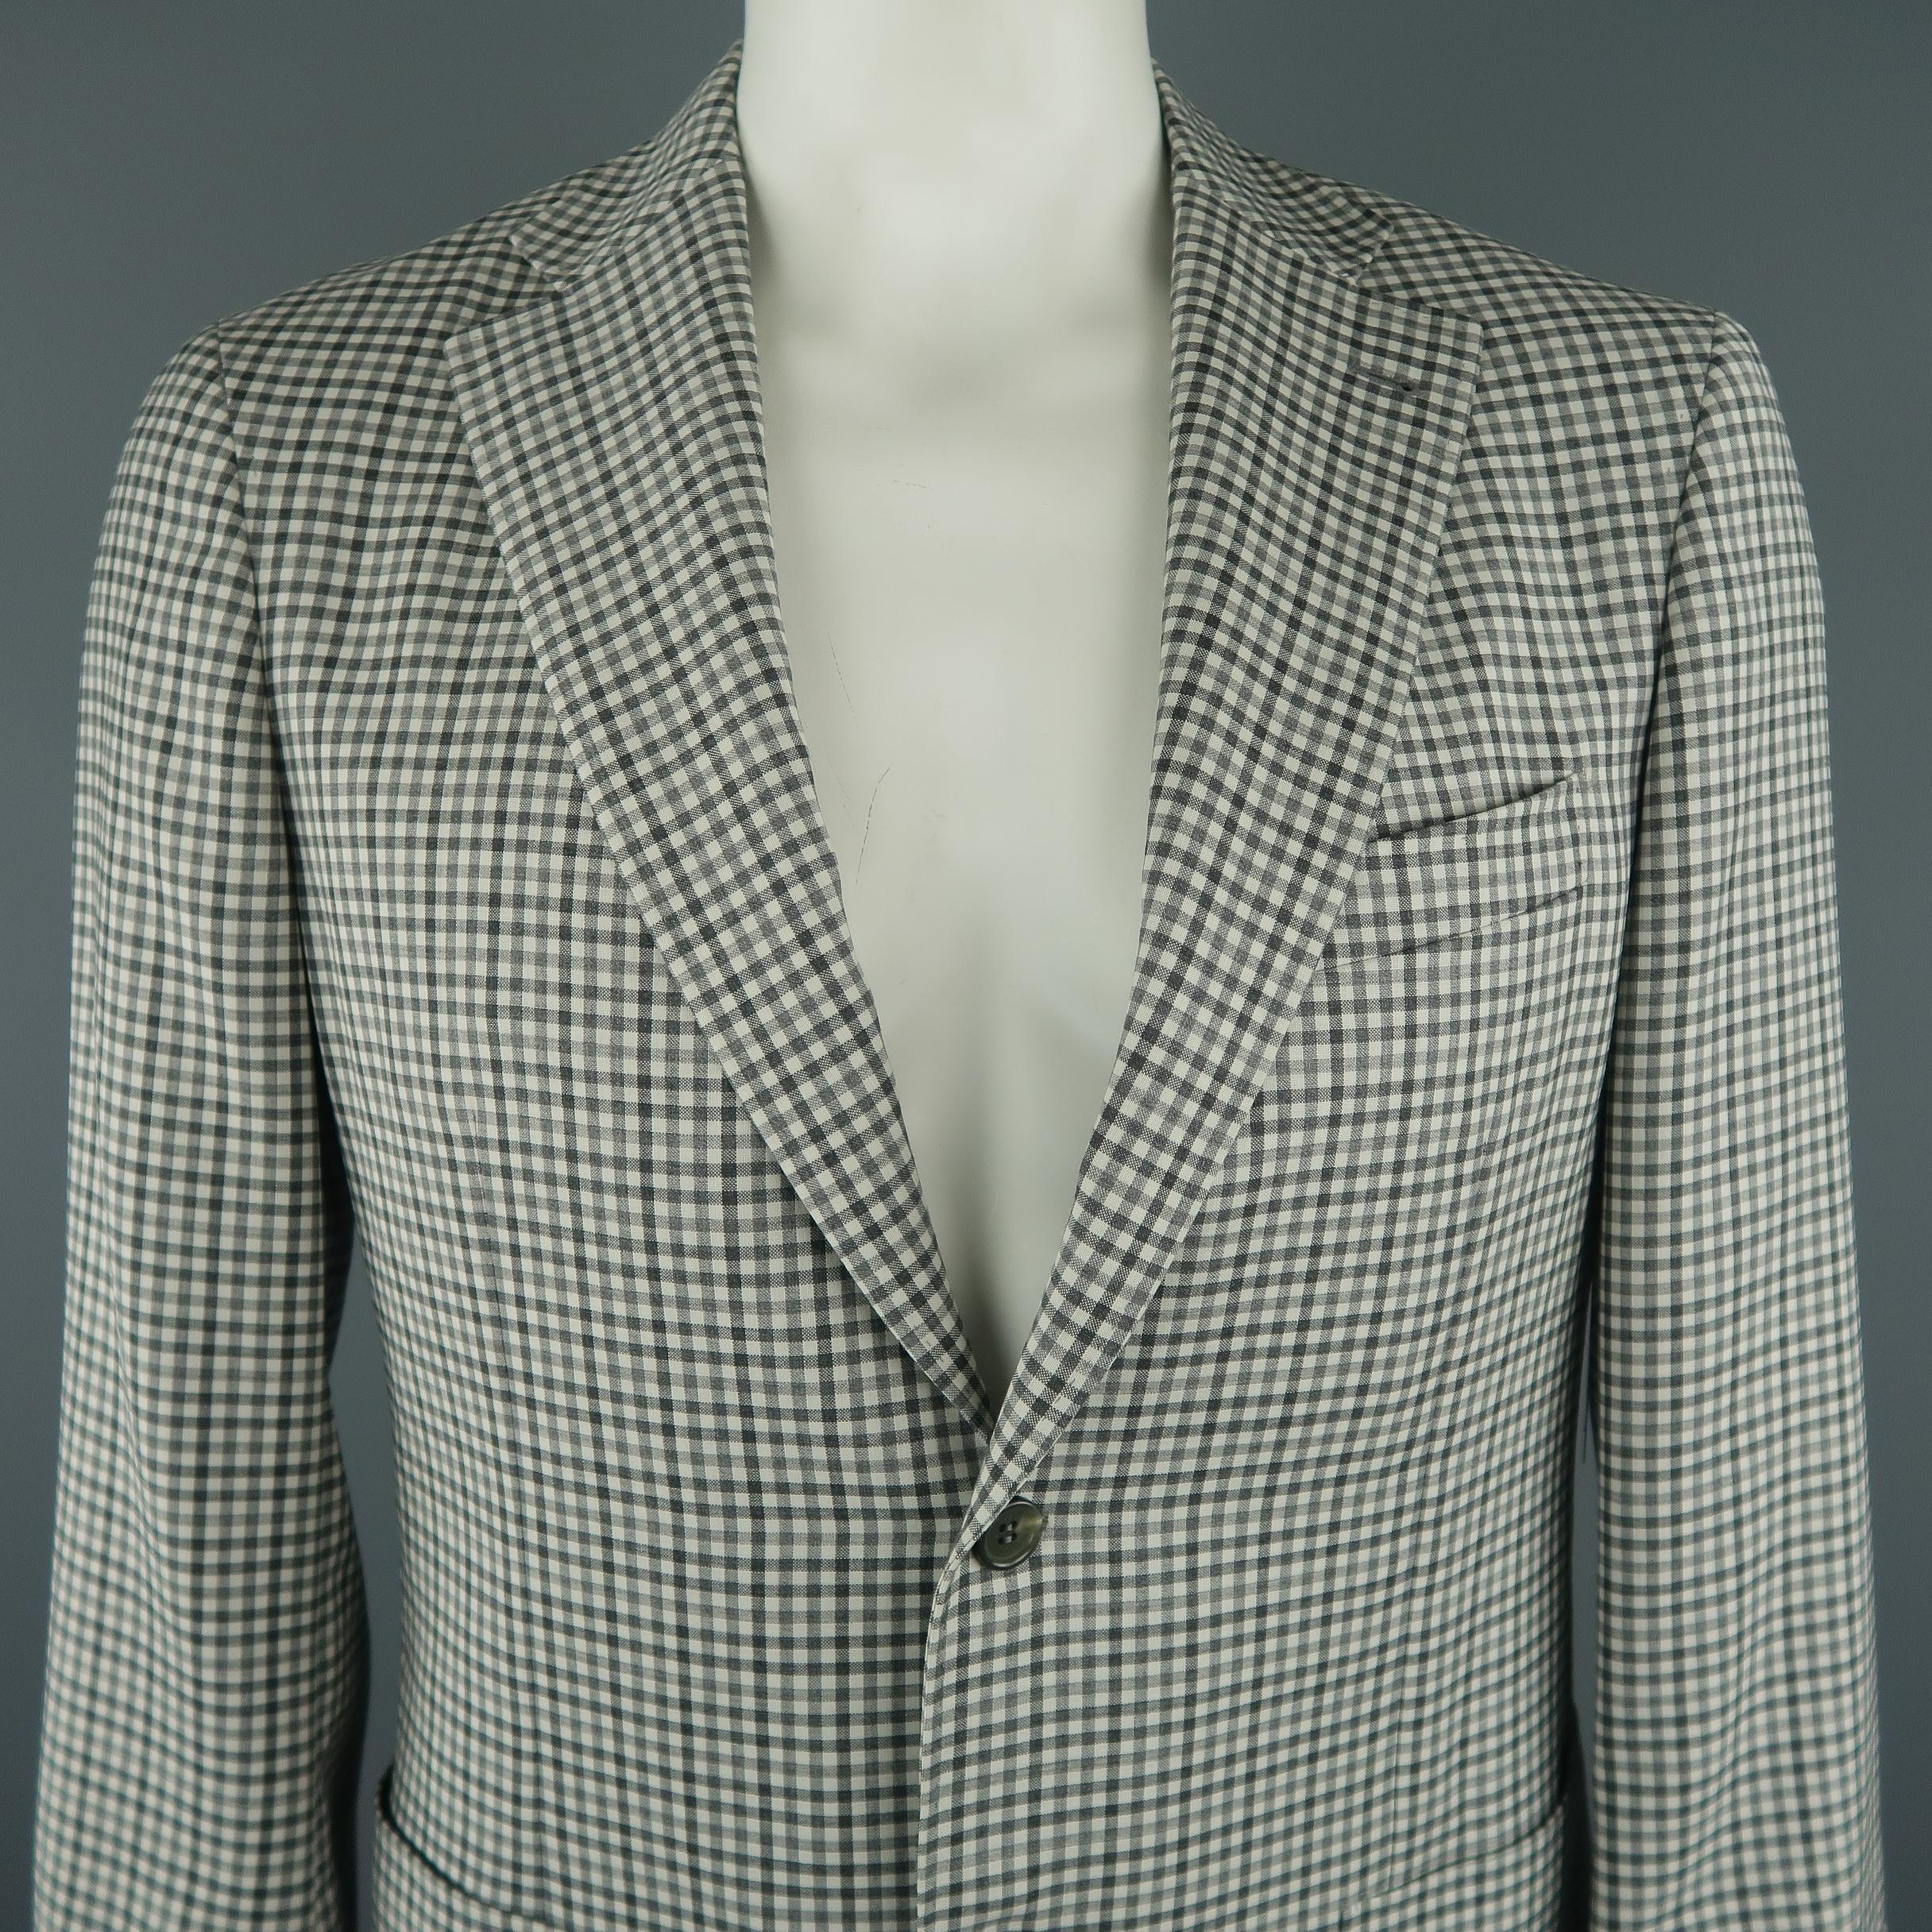 CANALI blazer comes in grey tones in a checkered wool material, featuring a notch lapel, slit and patch pockets, 2 buttons closure, single breasted. Made in Italy.
 
Excellent Pre-Owned Condition.
Marked: 52R IT
 
Measurements:
 
Shoulder: 17